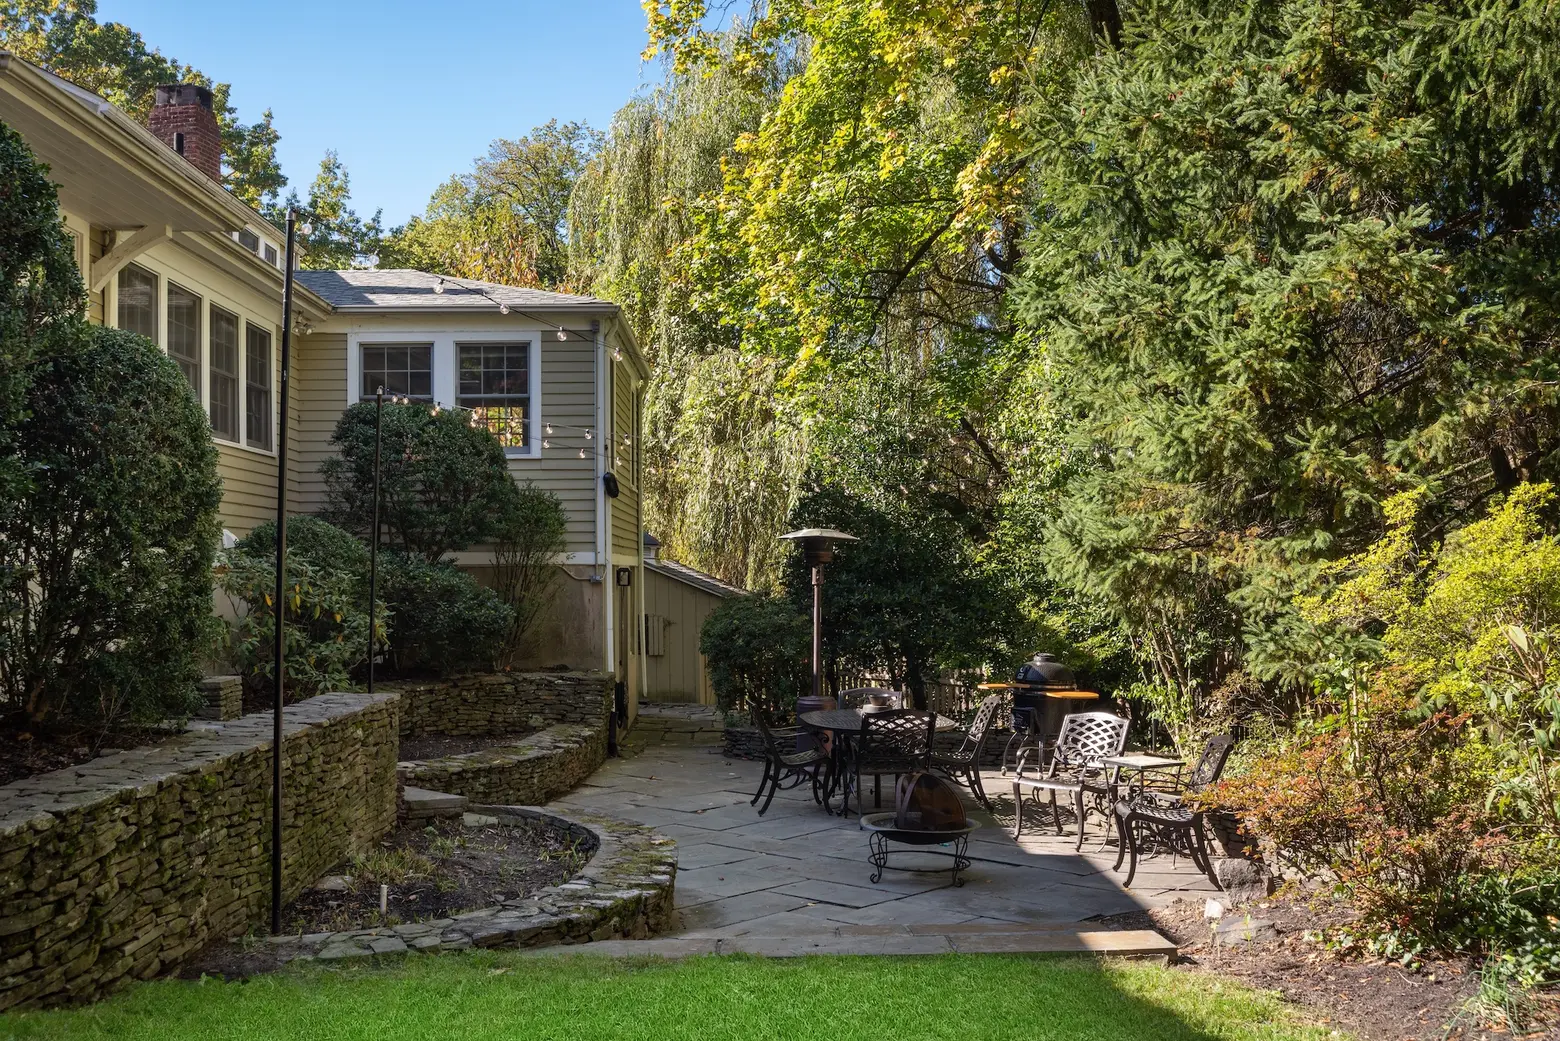 13 Heritage Hill Road, Tarrytown, Westchester